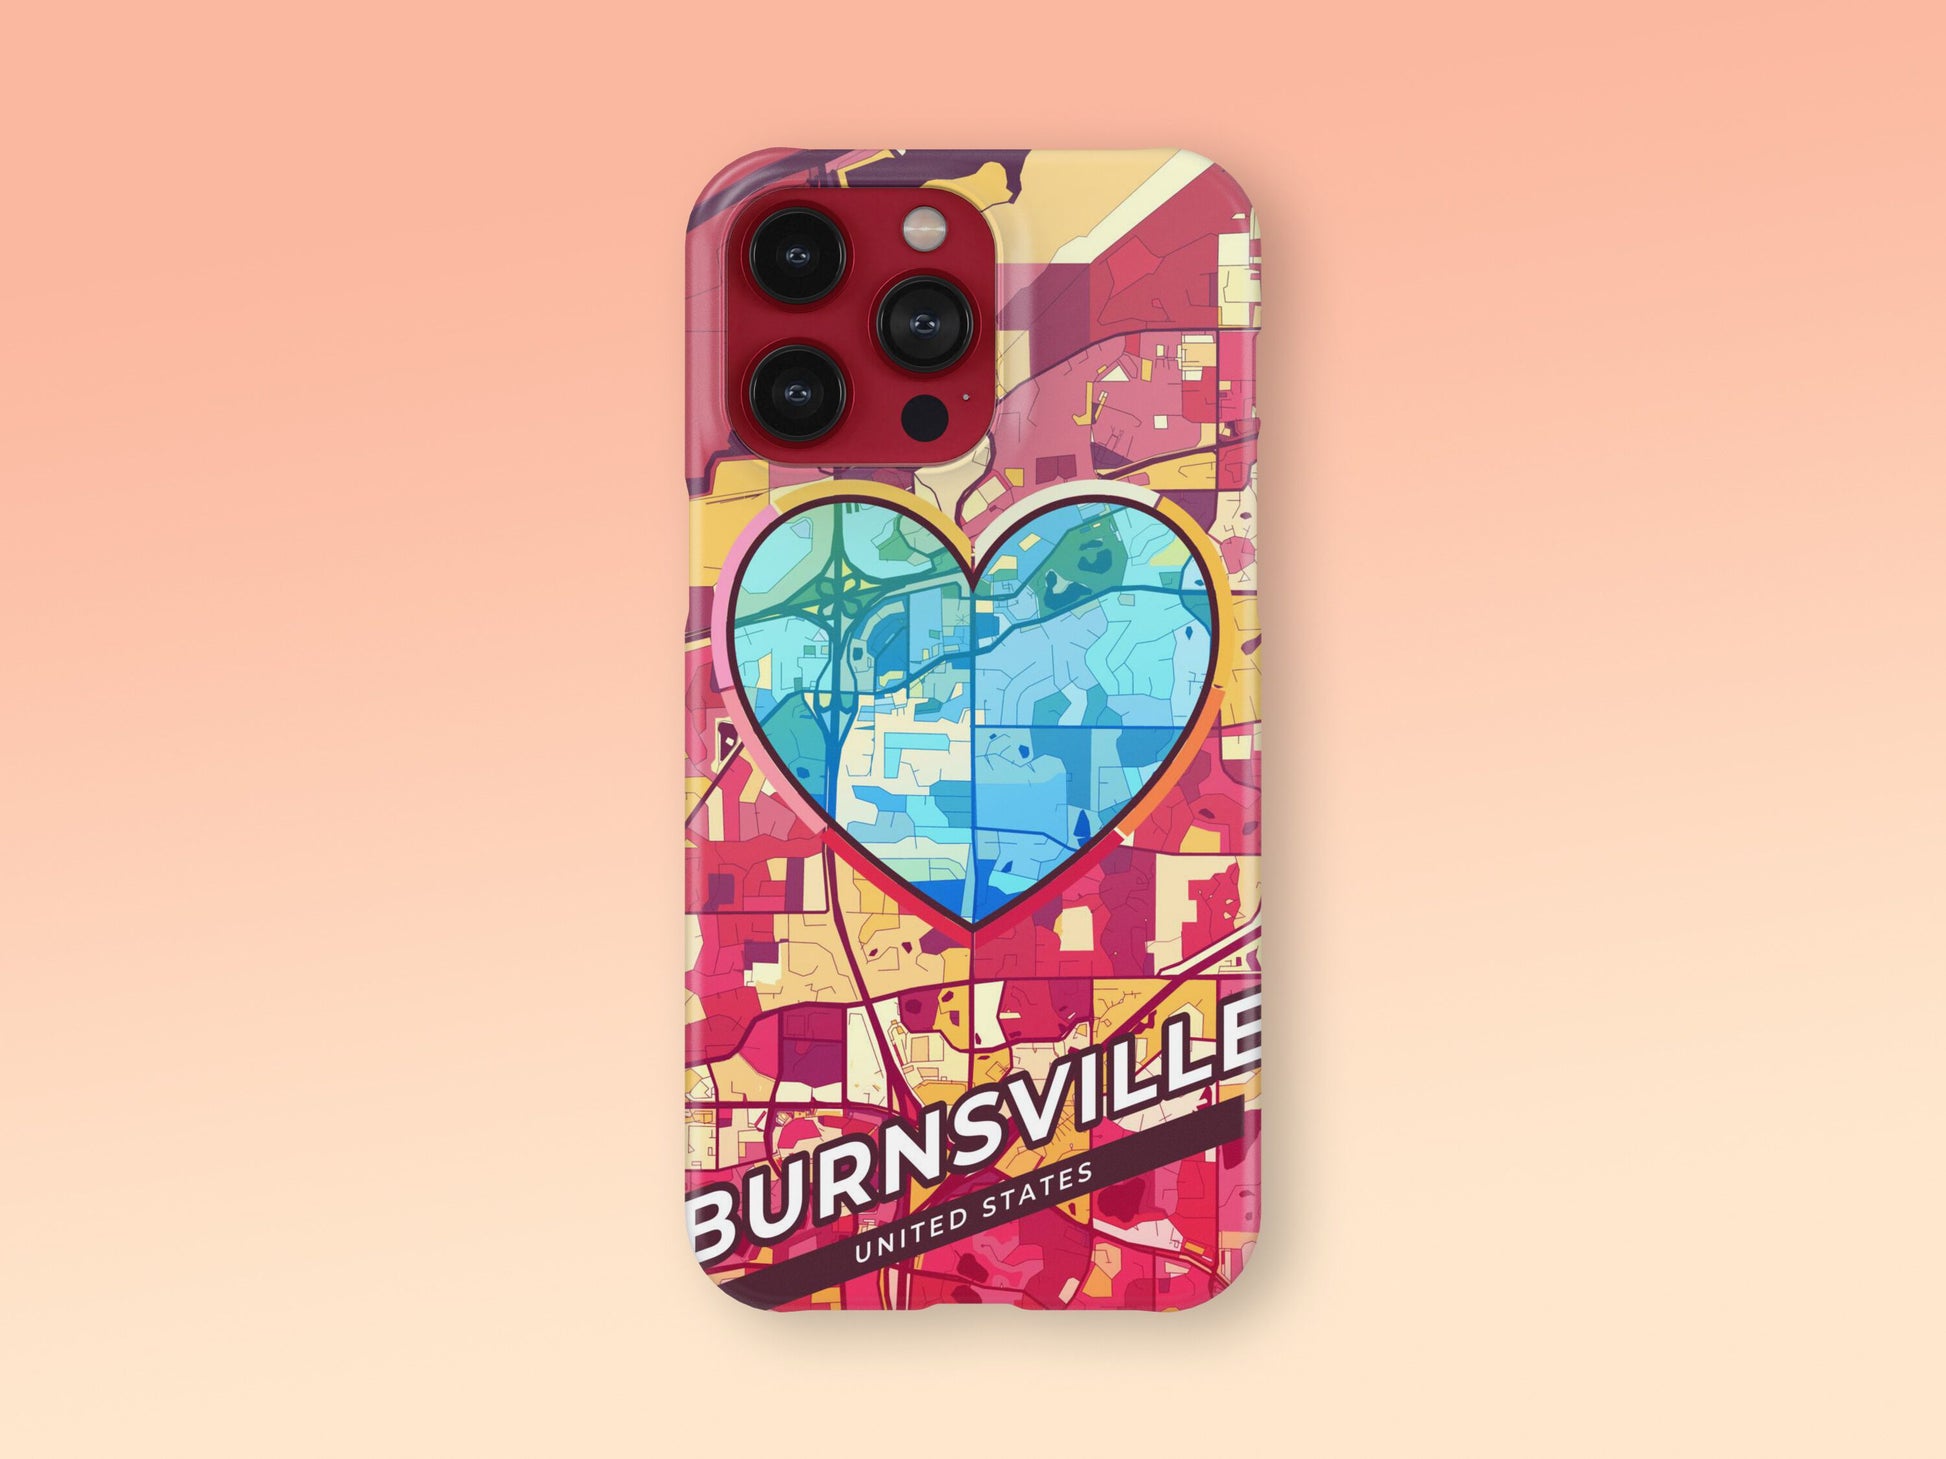 Burnsville Minnesota slim phone case with colorful icon. Birthday, wedding or housewarming gift. Couple match cases. 2